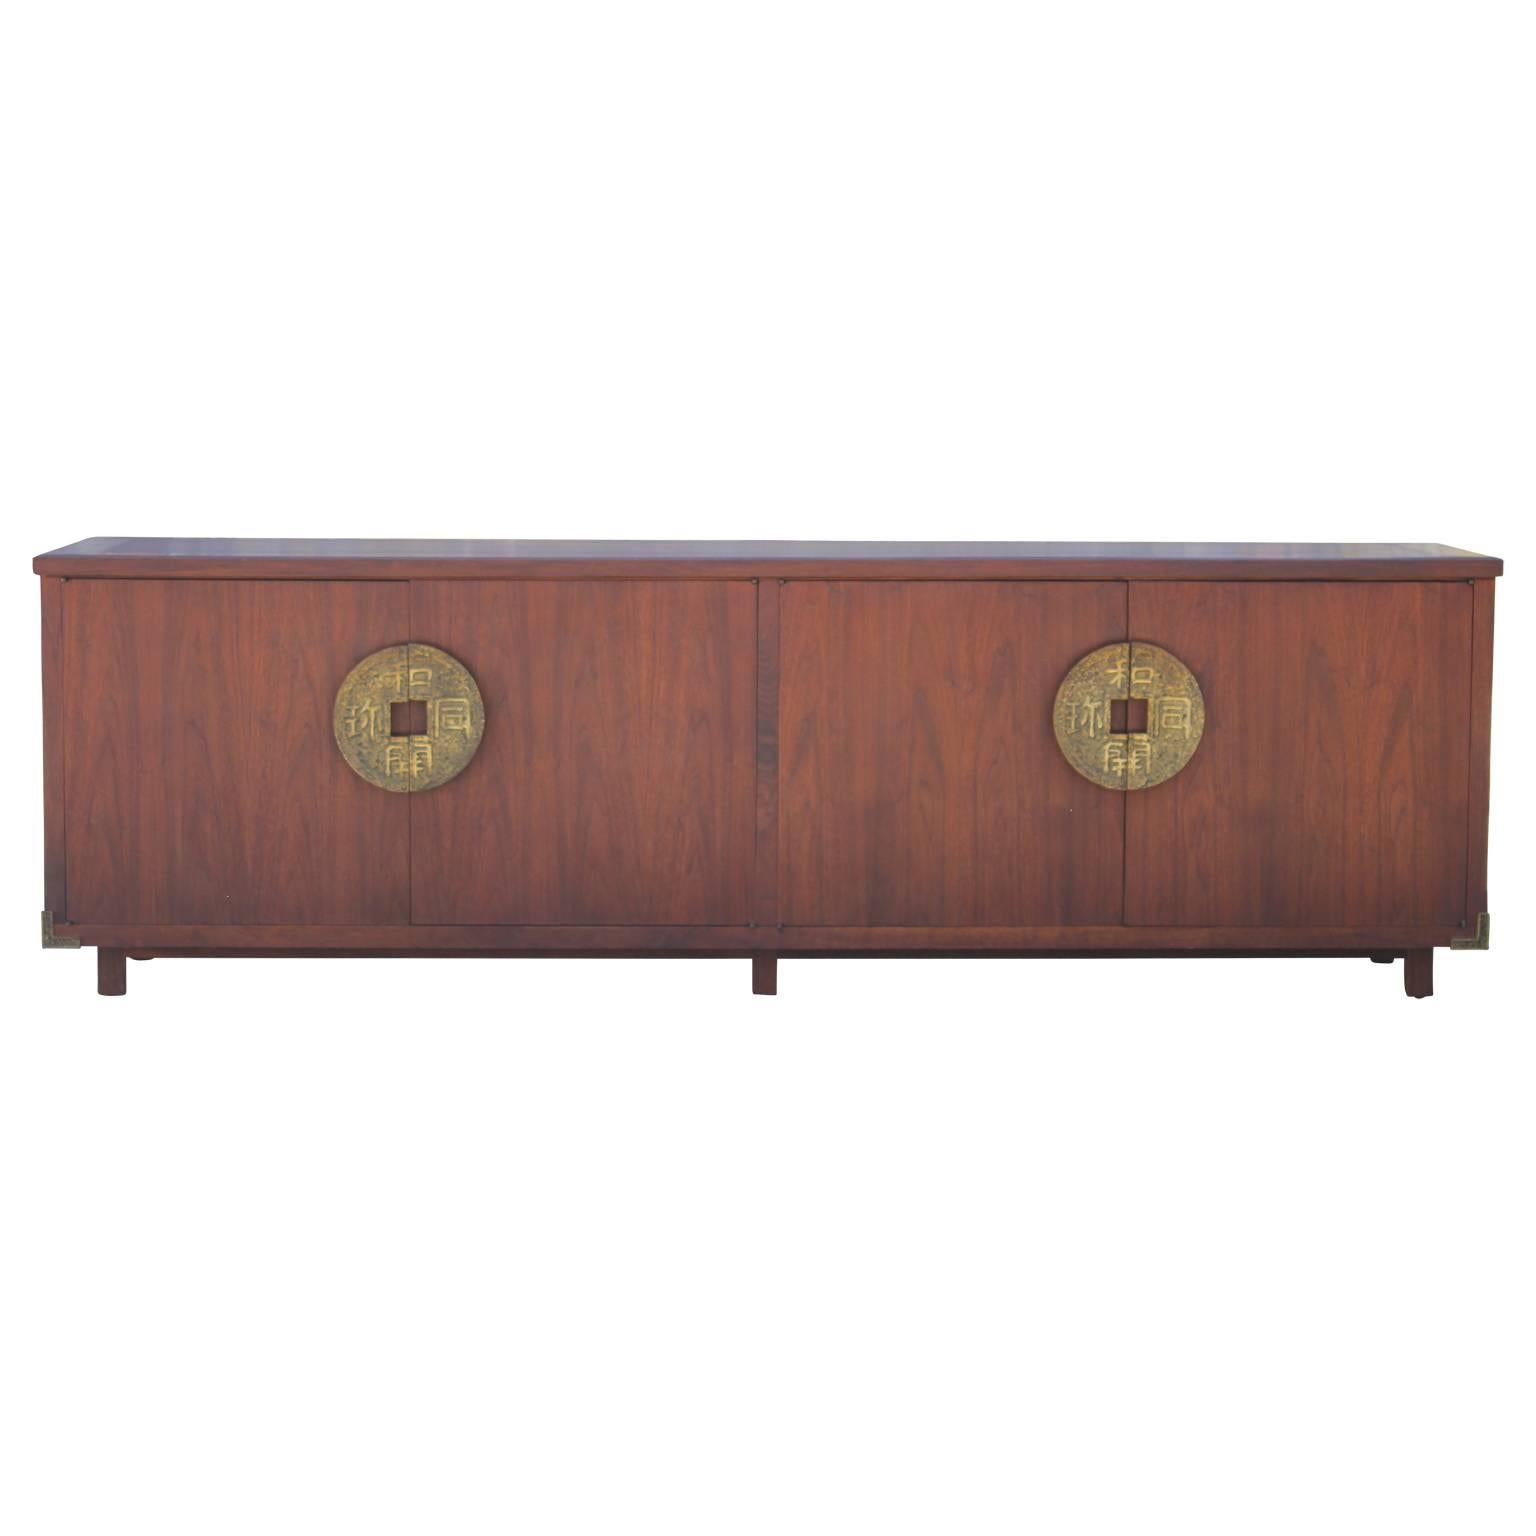 Custom-made clean walnut credenza or sideboard with heavy Chinese coin brass hardware by Houston's finest 1960s custom furniture designer -Evan's Monocle. Brass has a lovely patina.  Cabinet doors open to reveal a variety of drawers, as shown in the